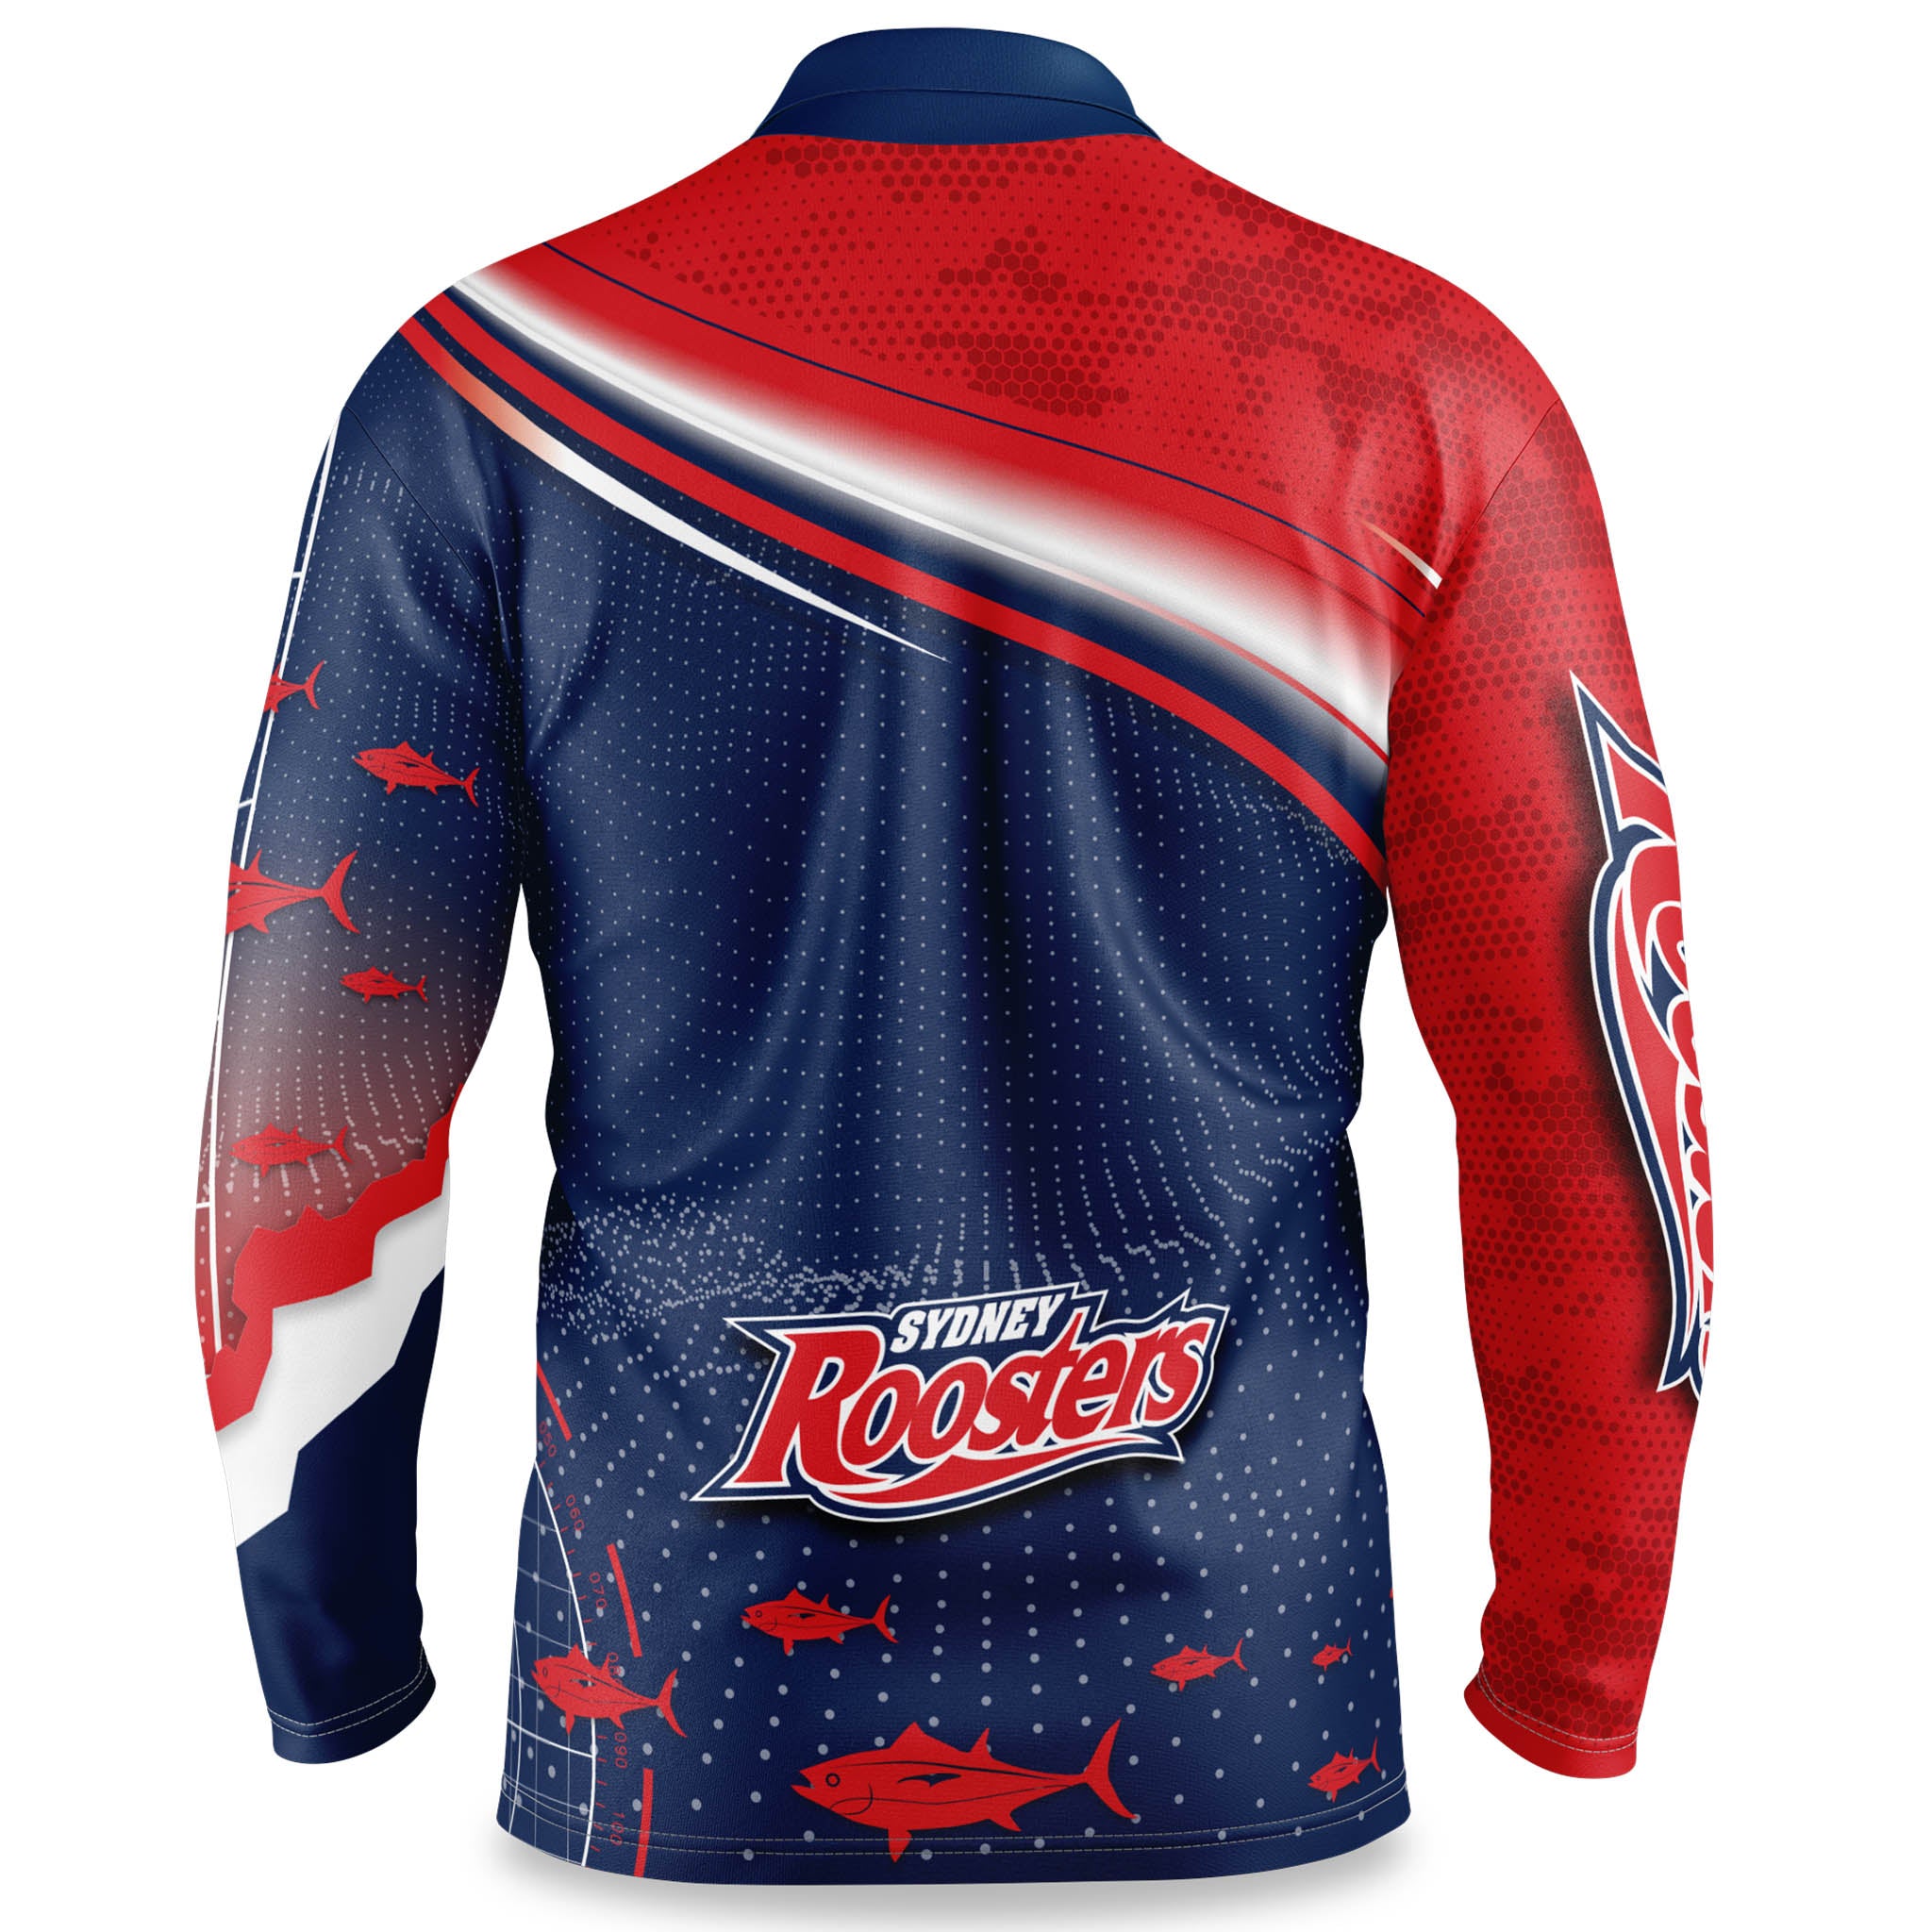 Roosters Fishfinder Fishing Shirt - The Rugby Shop Darwin